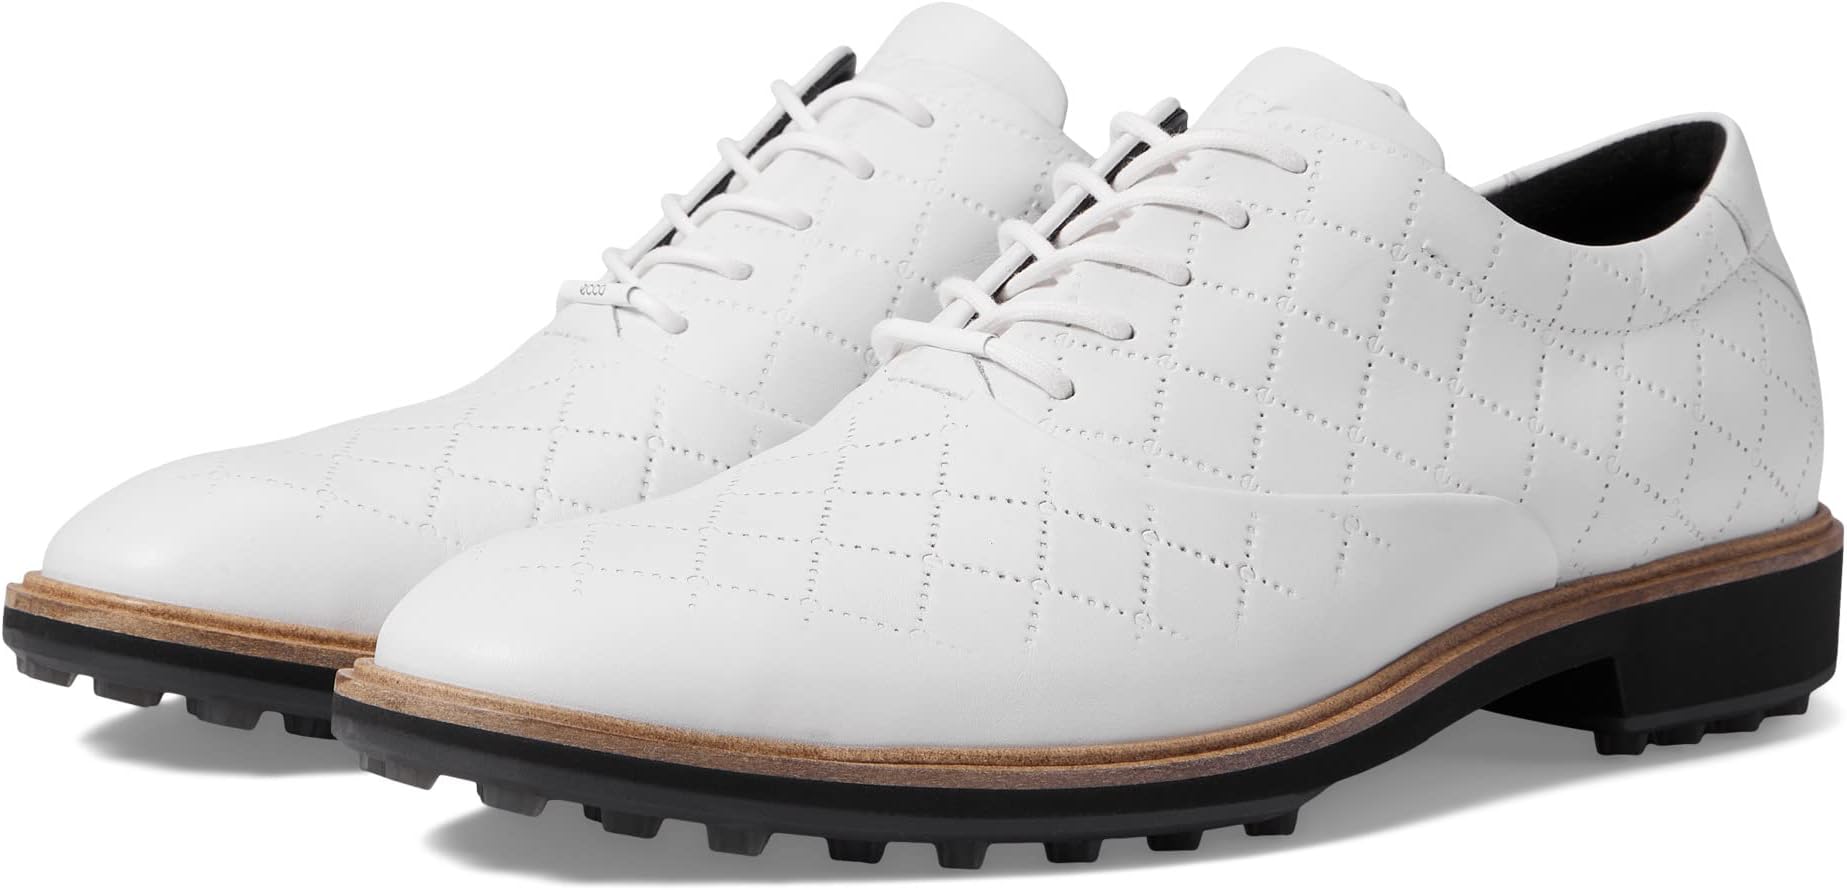 Кроссовки Classic Hybrid Hydromax Golf Shoes ECCO, цвет White Cow Leather black white leather men golf shoes classic style outdoor golf training sneakers plus size 38 47 mens golf trainers leather shoes